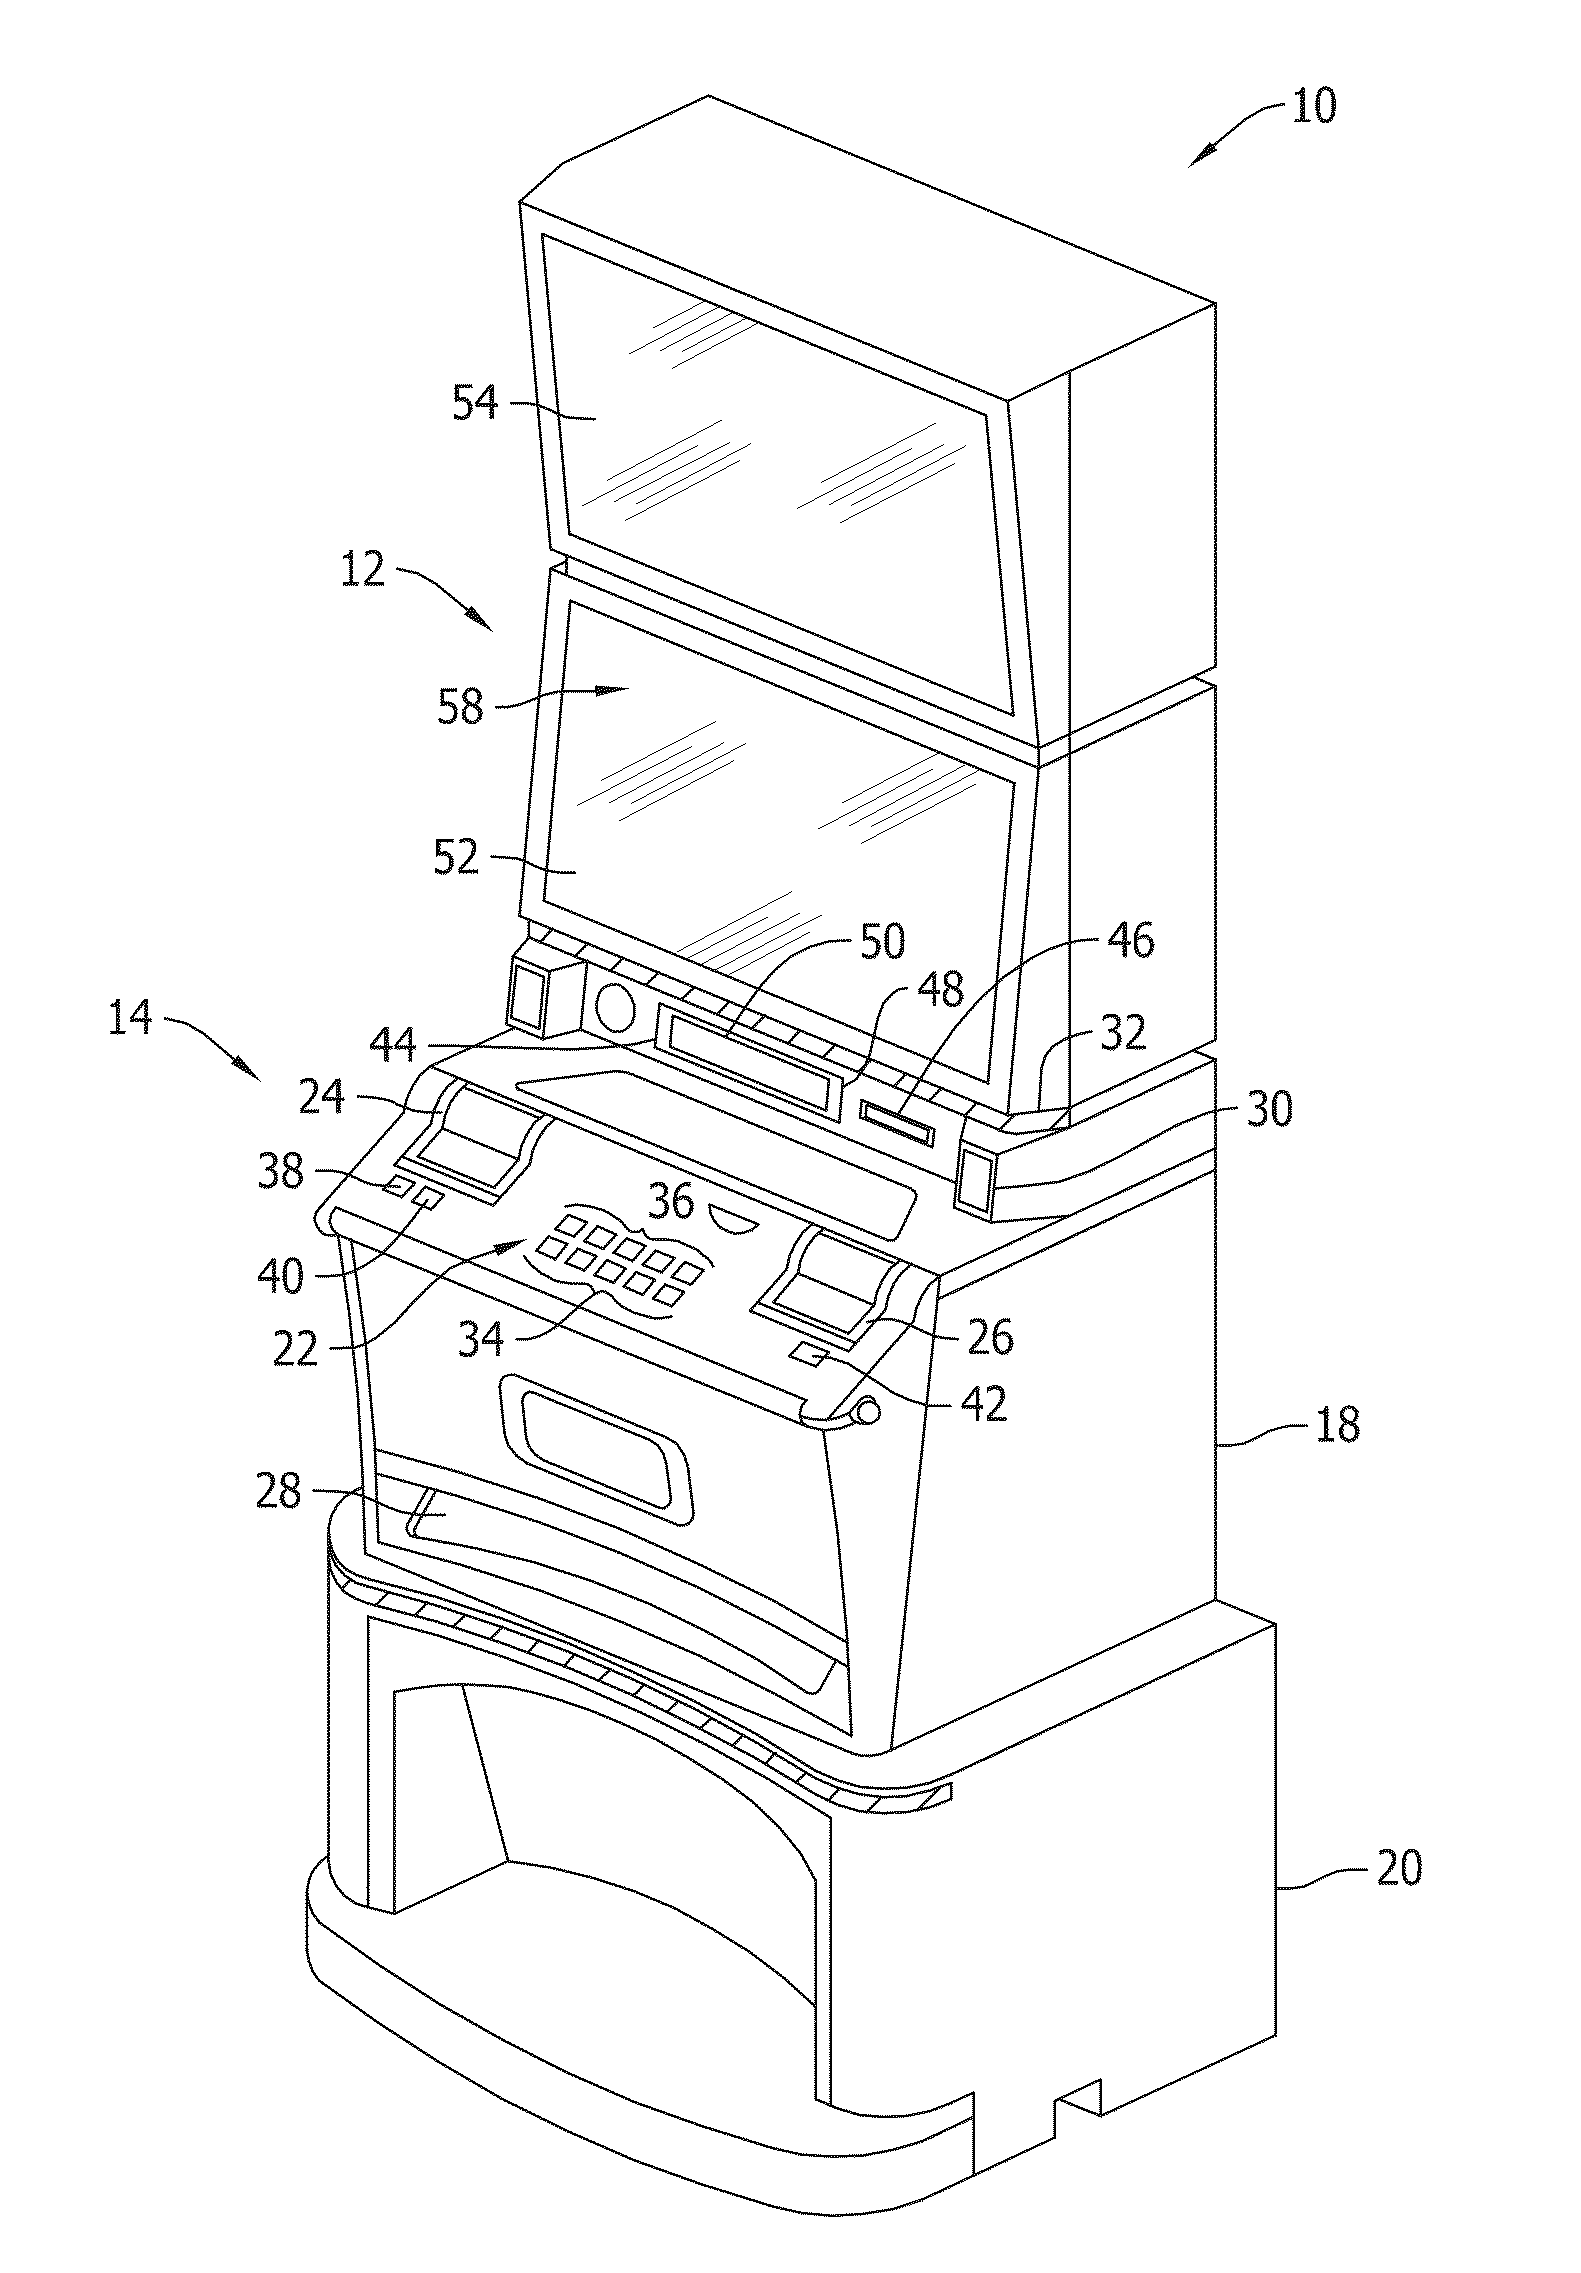 Gaming device and methods of allowing a player to play a gaming device having selectable awards